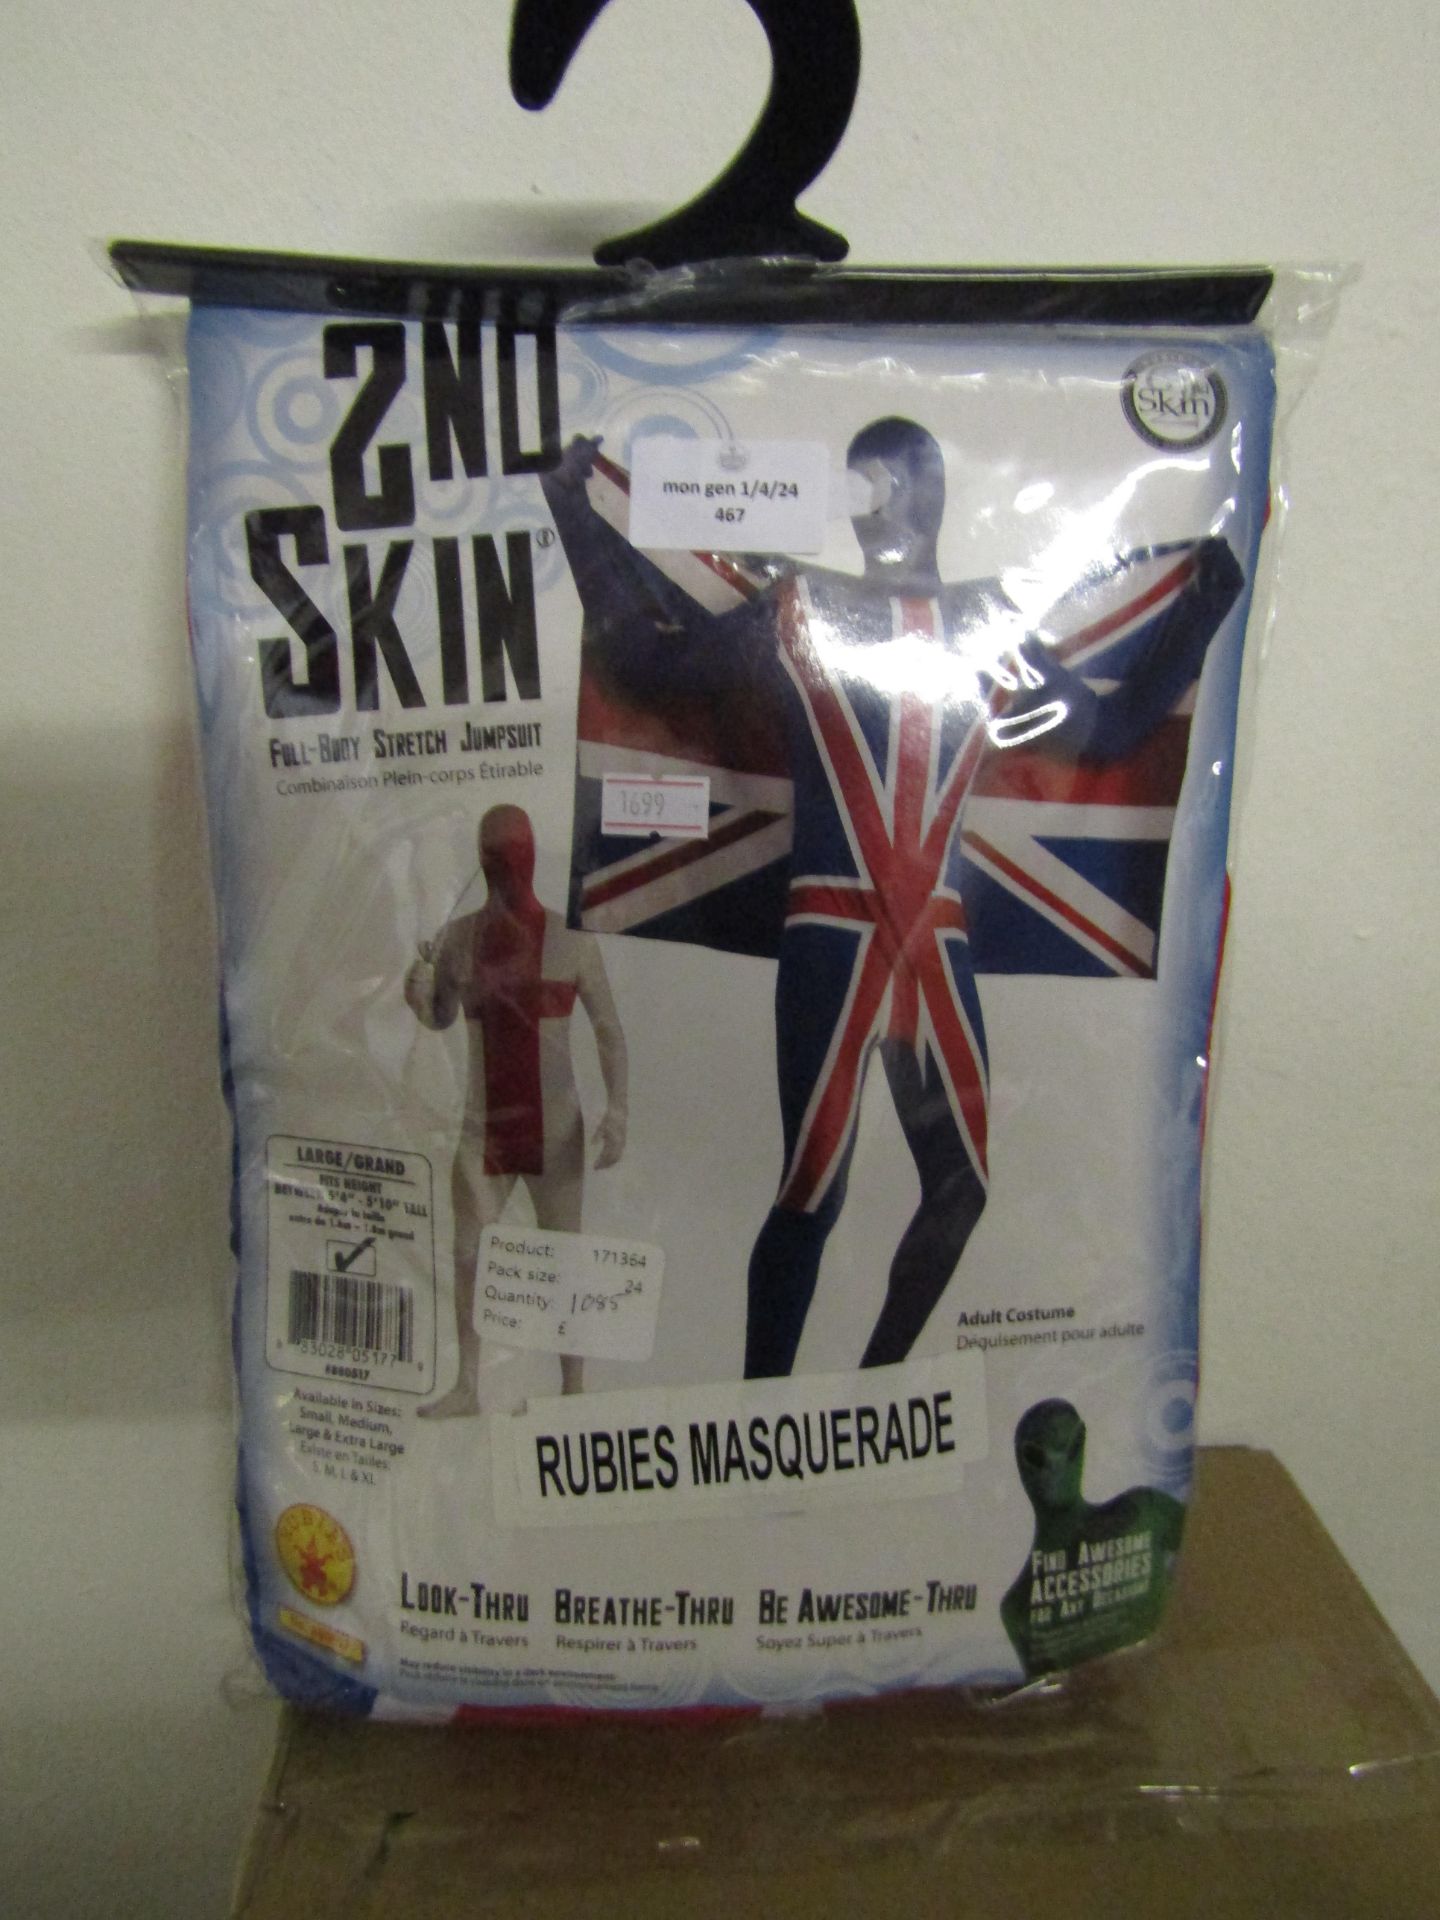 2ND Skin Jumpsuit, Unchecked & Packaged.